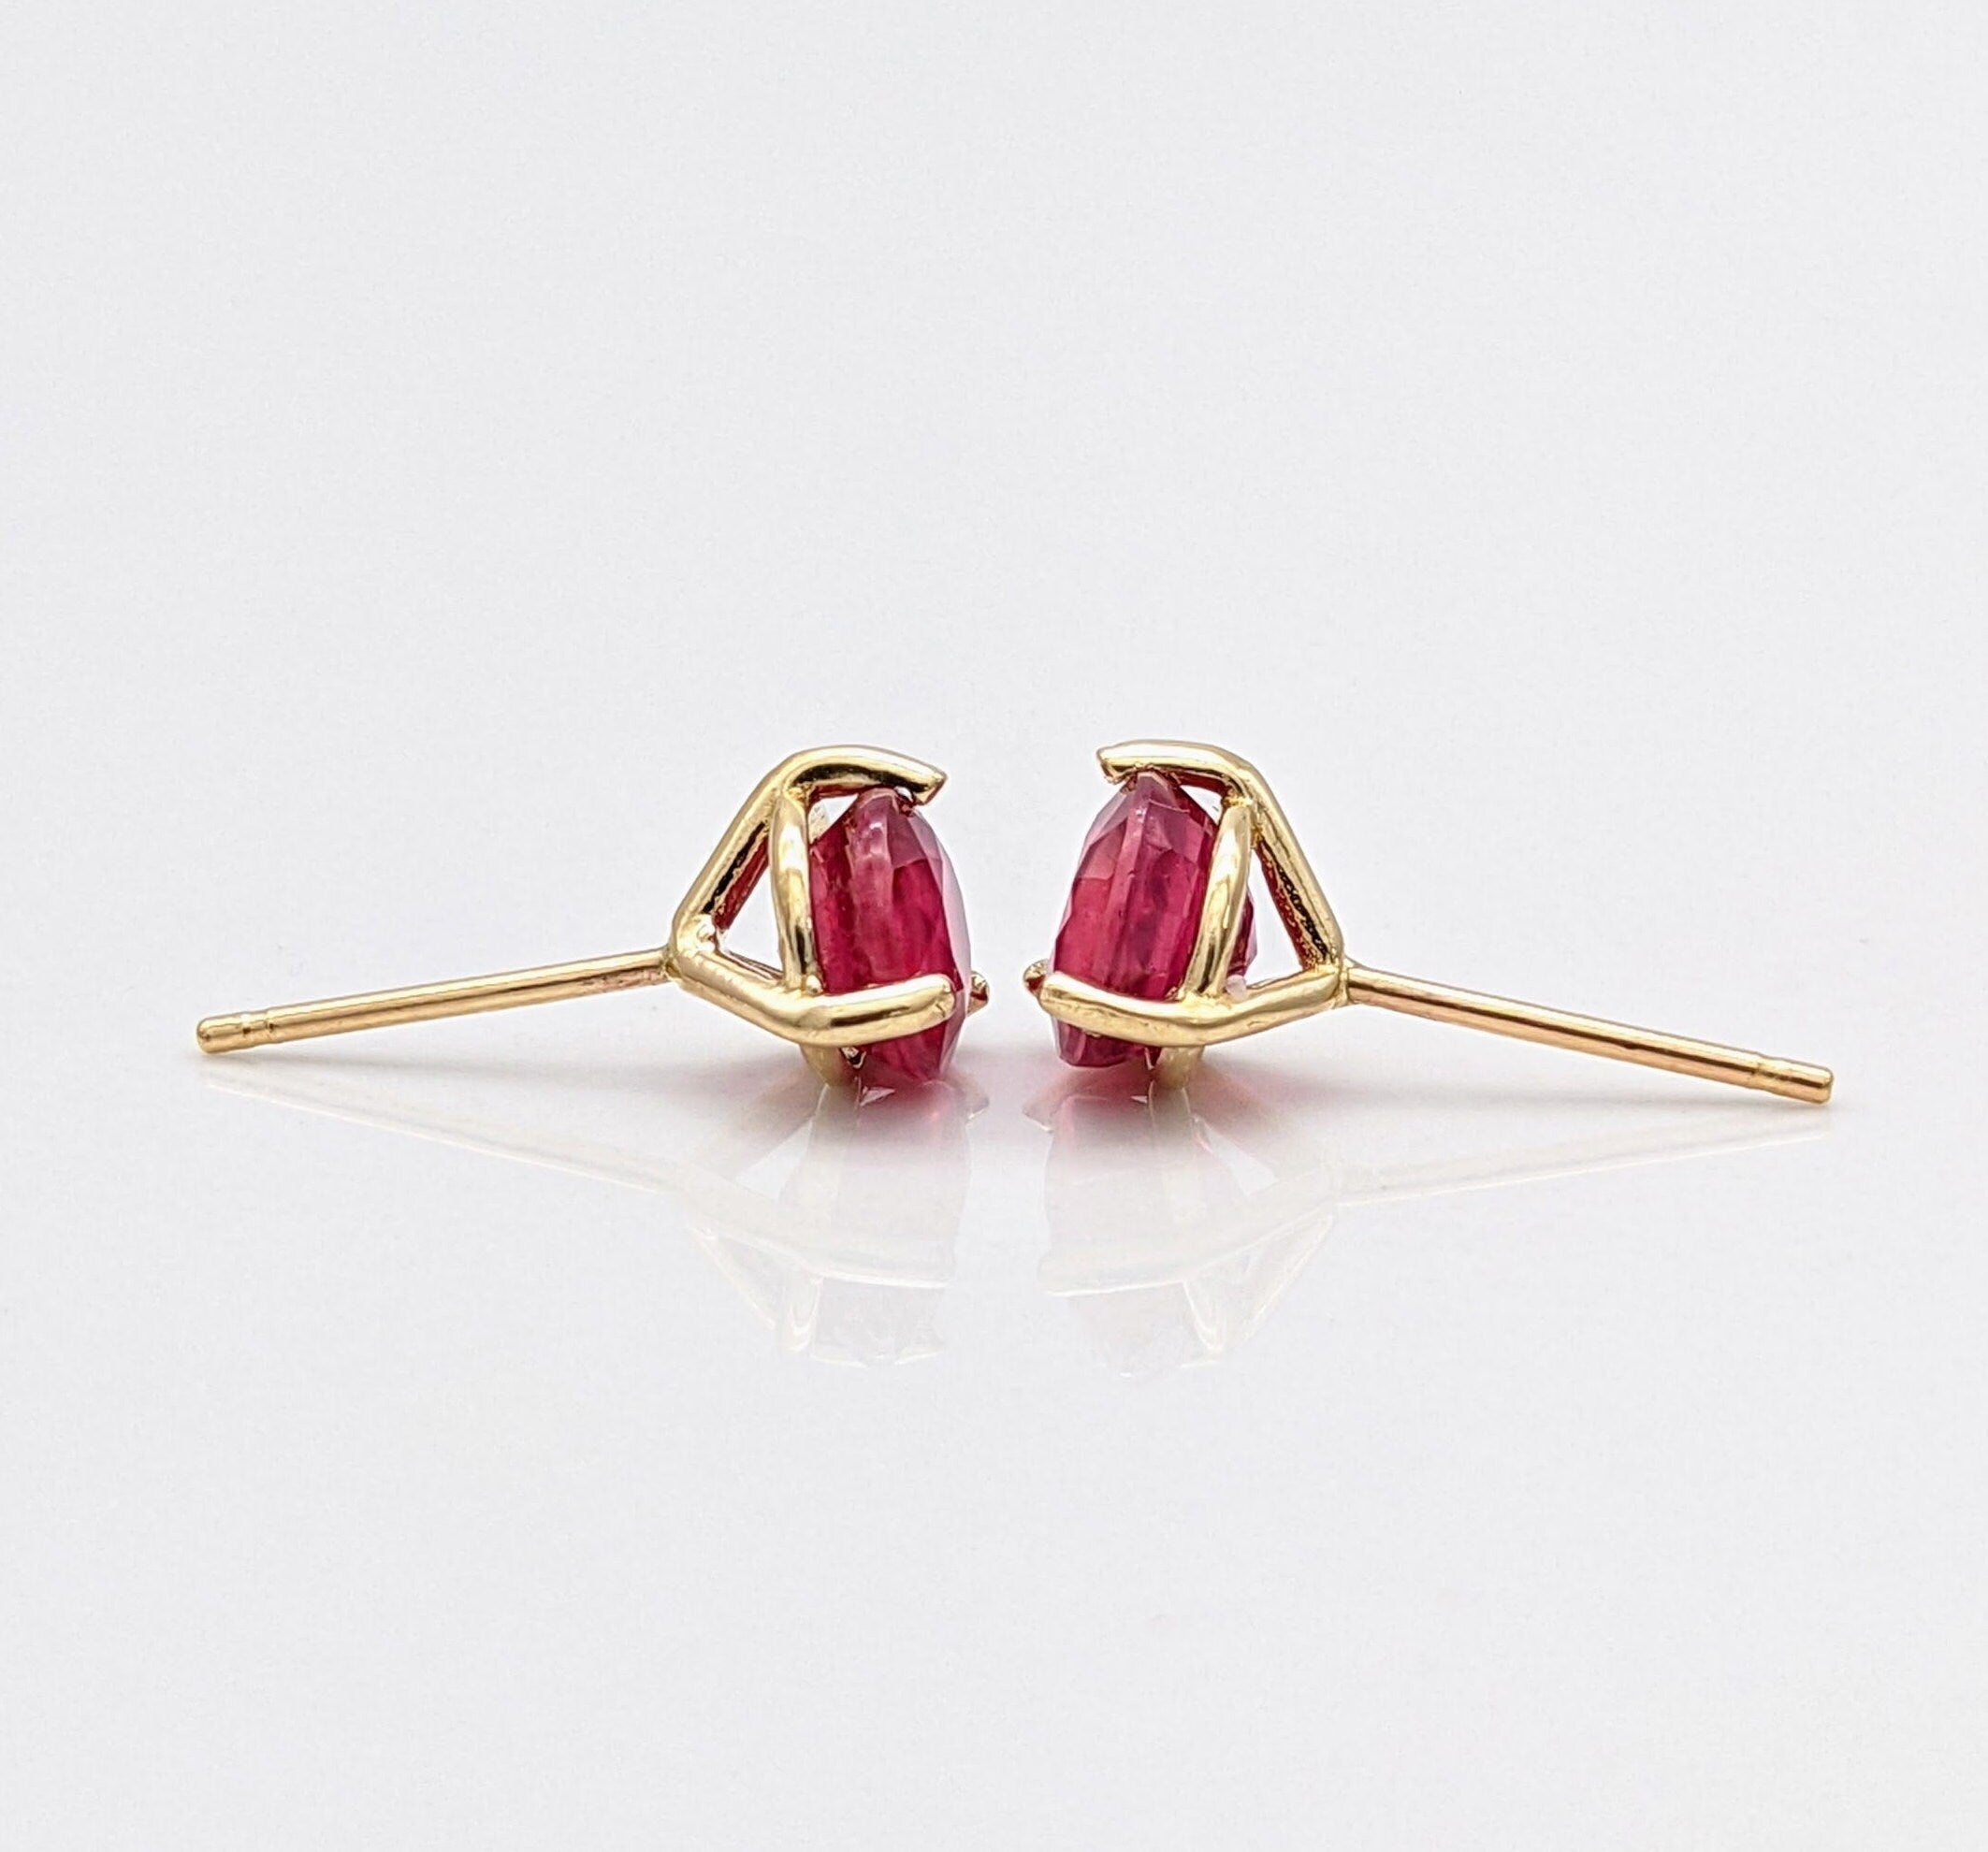 Natural Heated Red Ruby Studs in Solid 14k Yellow, White or Rose Gold | Round 4mm, 6mm | Martini Prong | July Birthstone | 3 Prong